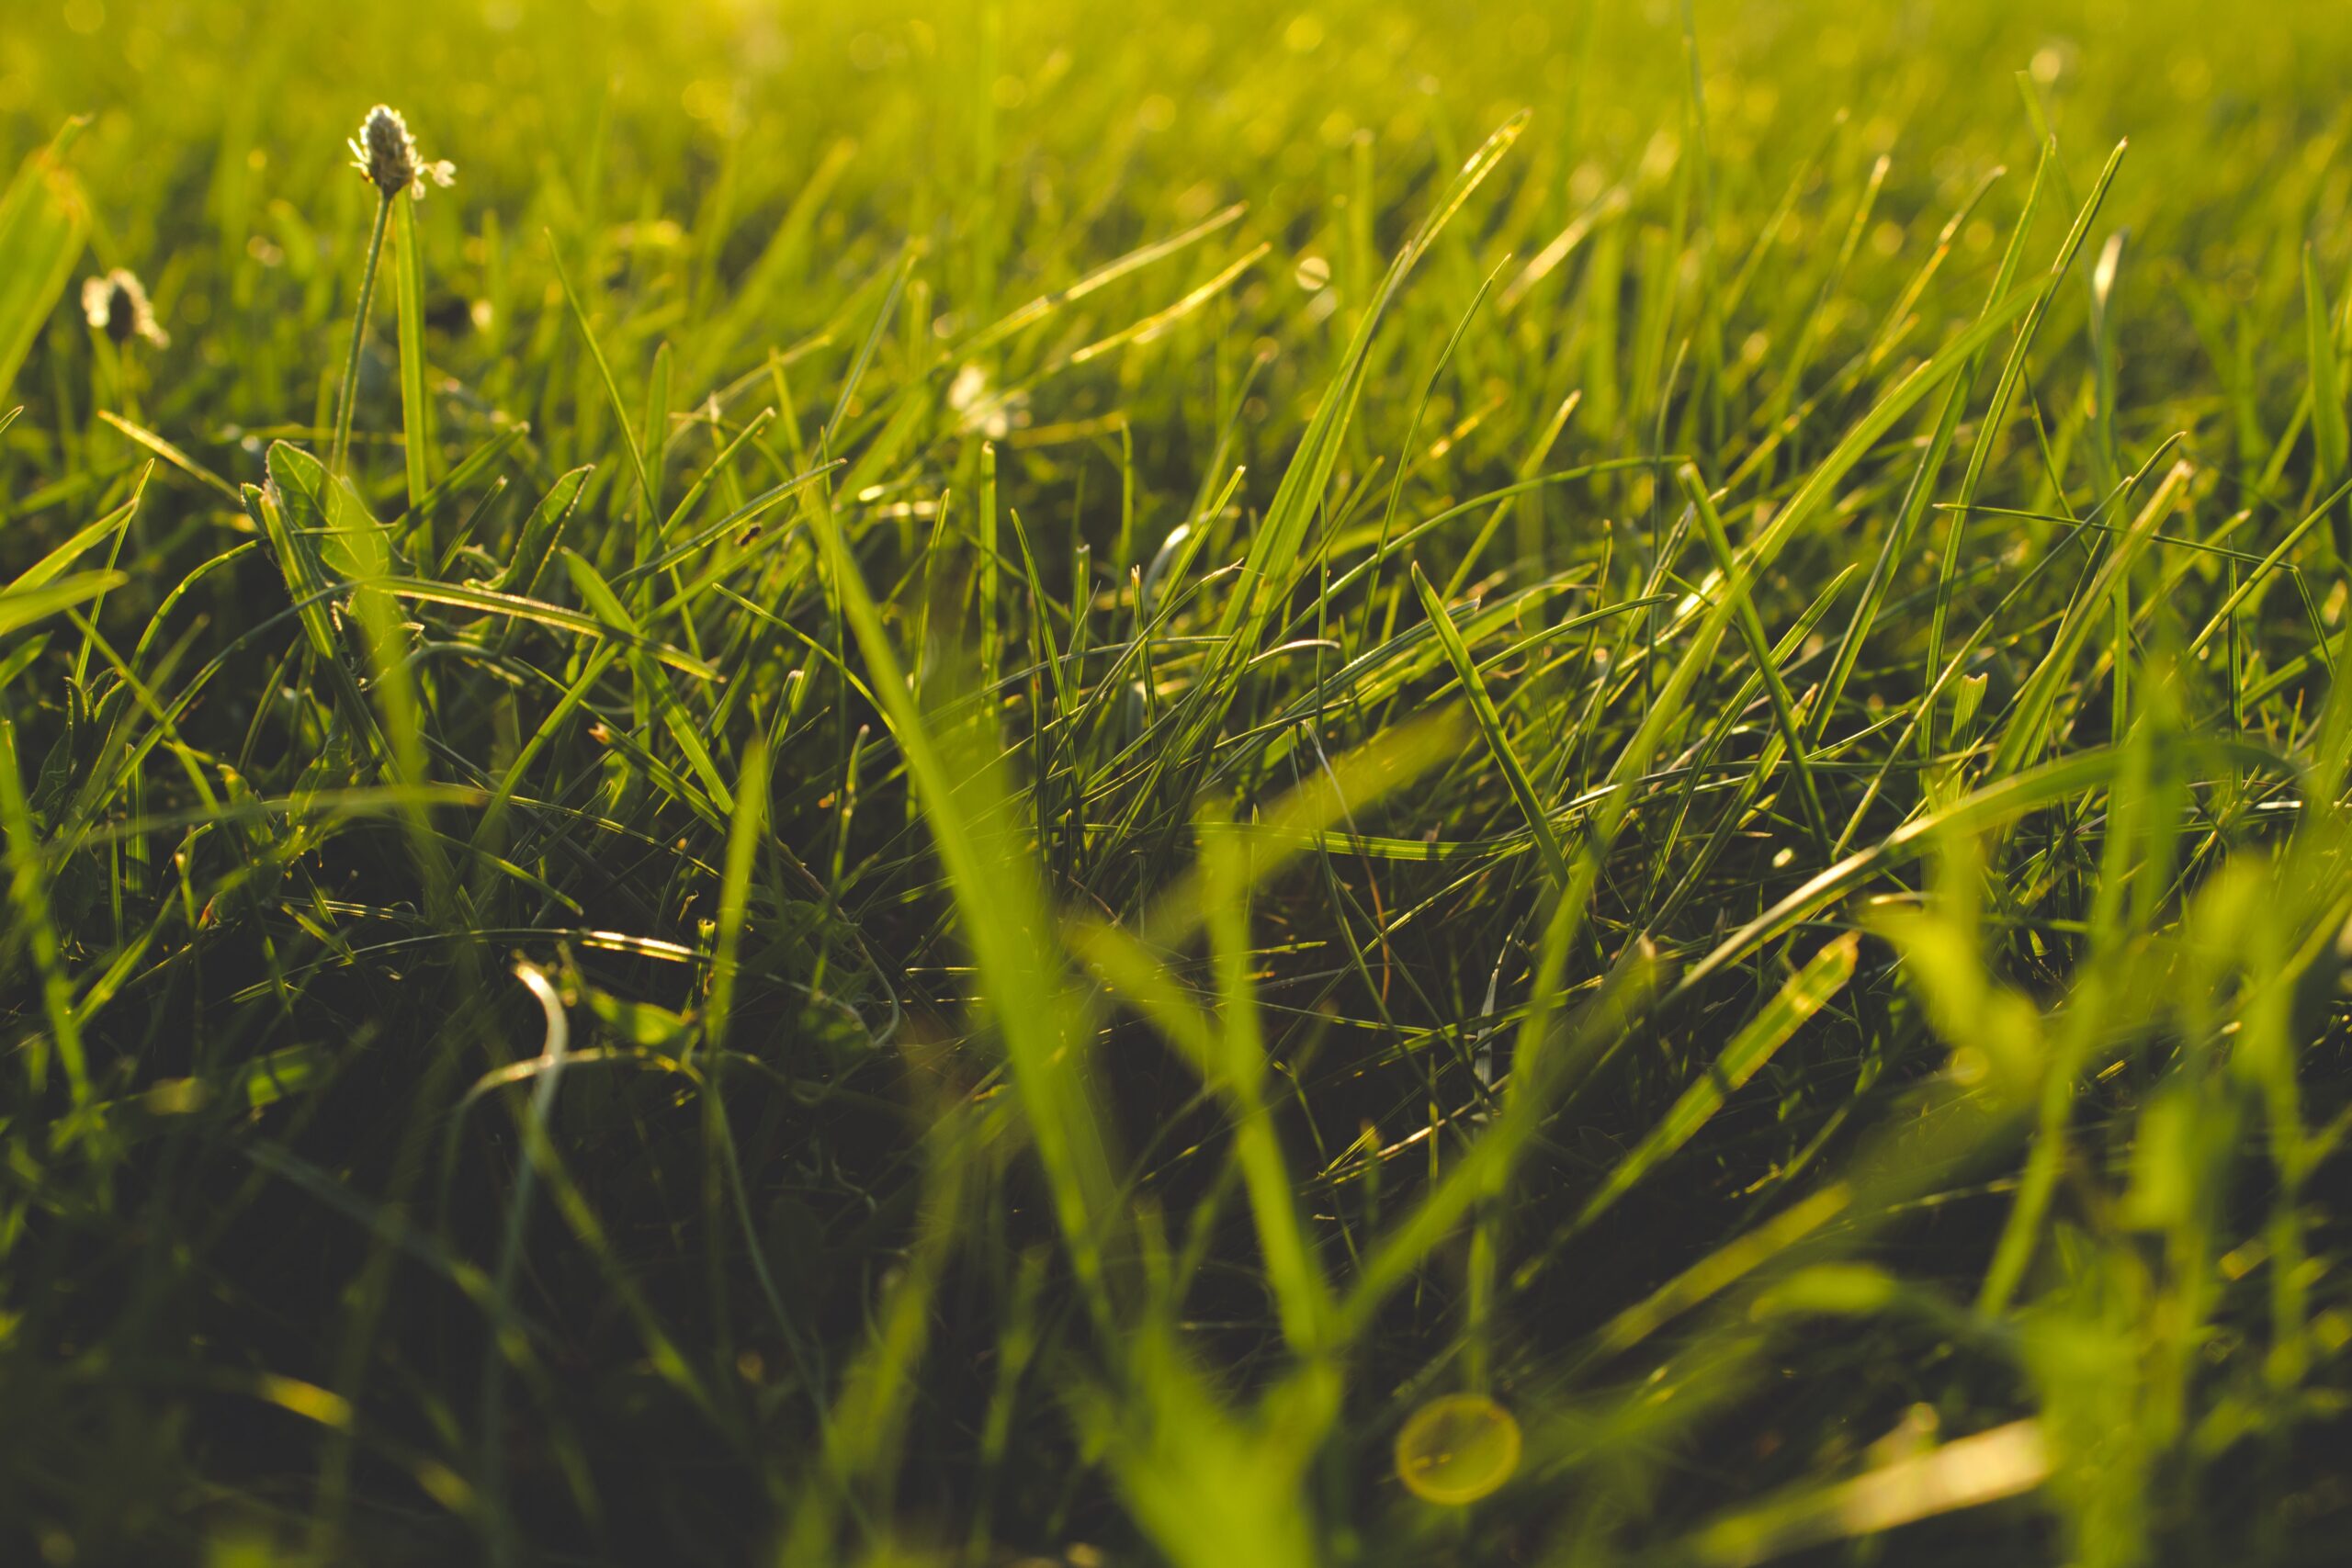 Do I Need to Bag My Grass Clippings if I Have Weeds?